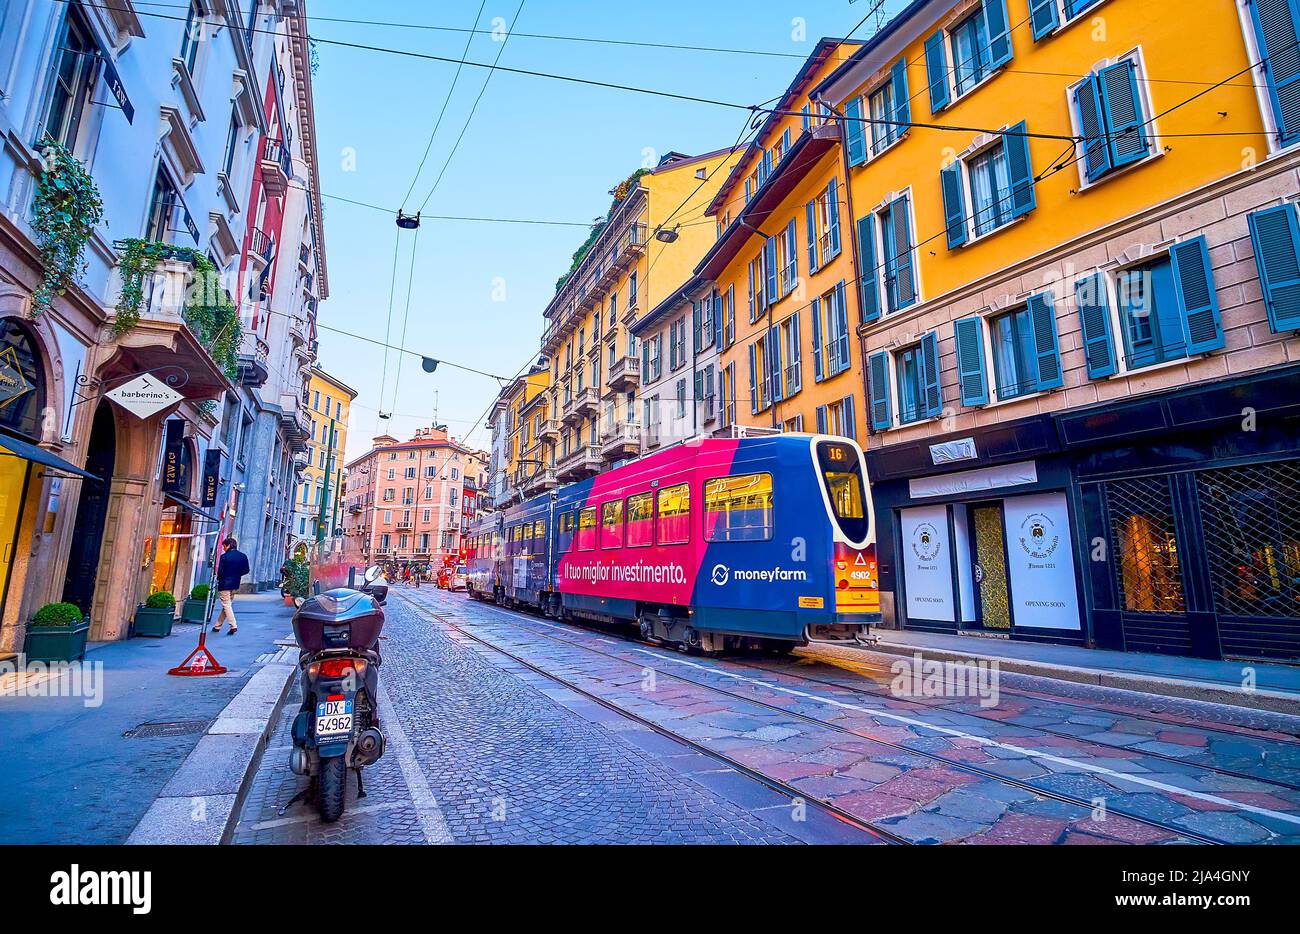 MILAN, ITALY - APRIL 5, 2022: The old tram rides along Corso Magenta street with typical Italian houses, on April 5 in Milan, Italy Stock Photo